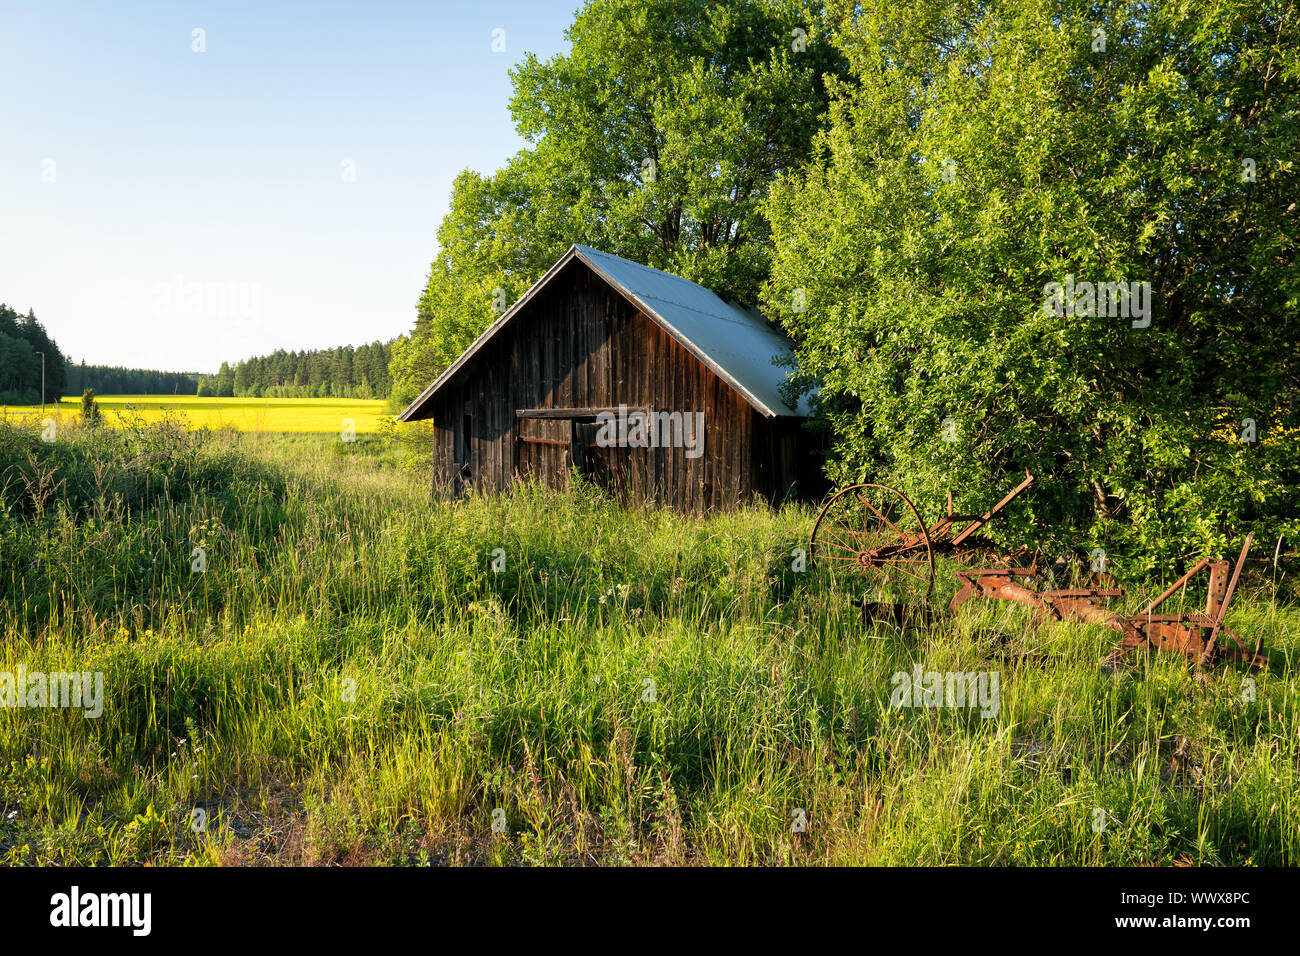 Traditional old Finnish wooden barn at Rusko, Finland. This was taken in July 2017 Stock Photo - Alamy